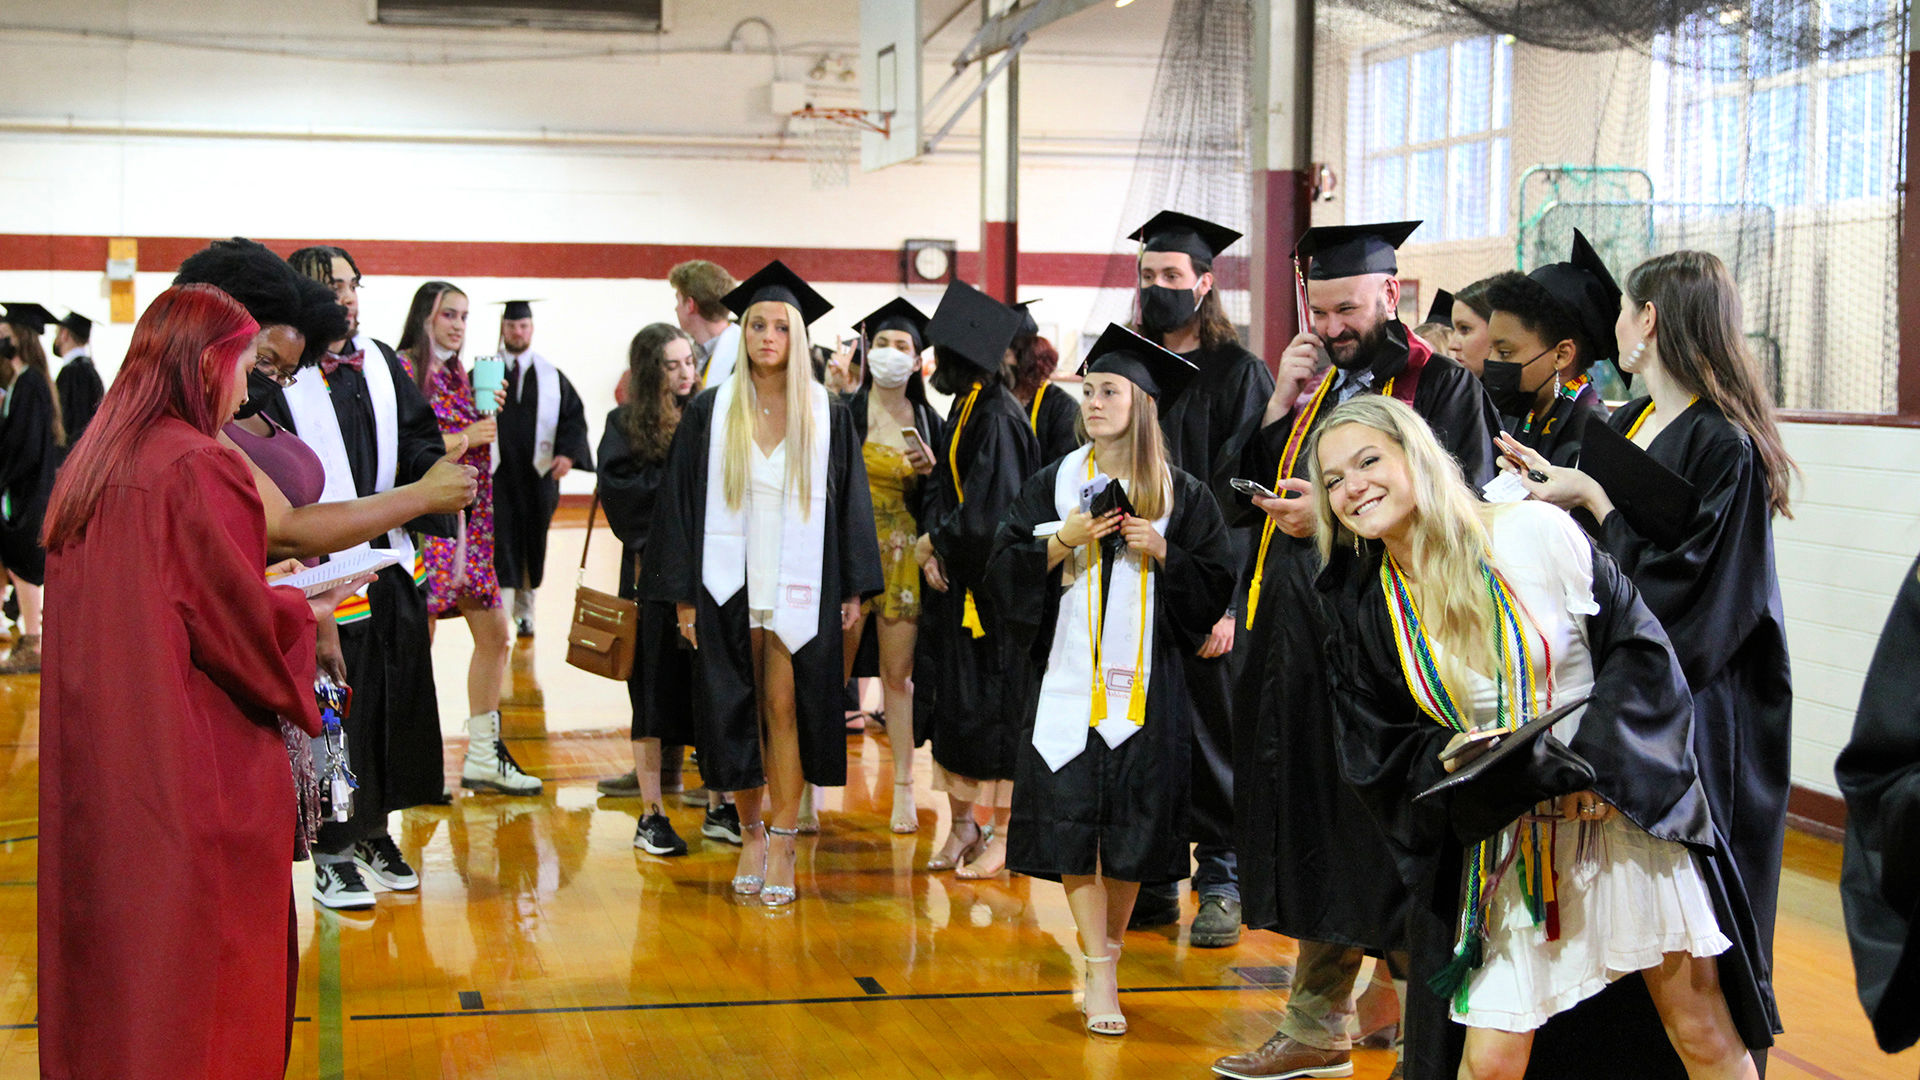 A student leans out of line to give a peace sign to the camera as the crowd lines up to enter Commencement.